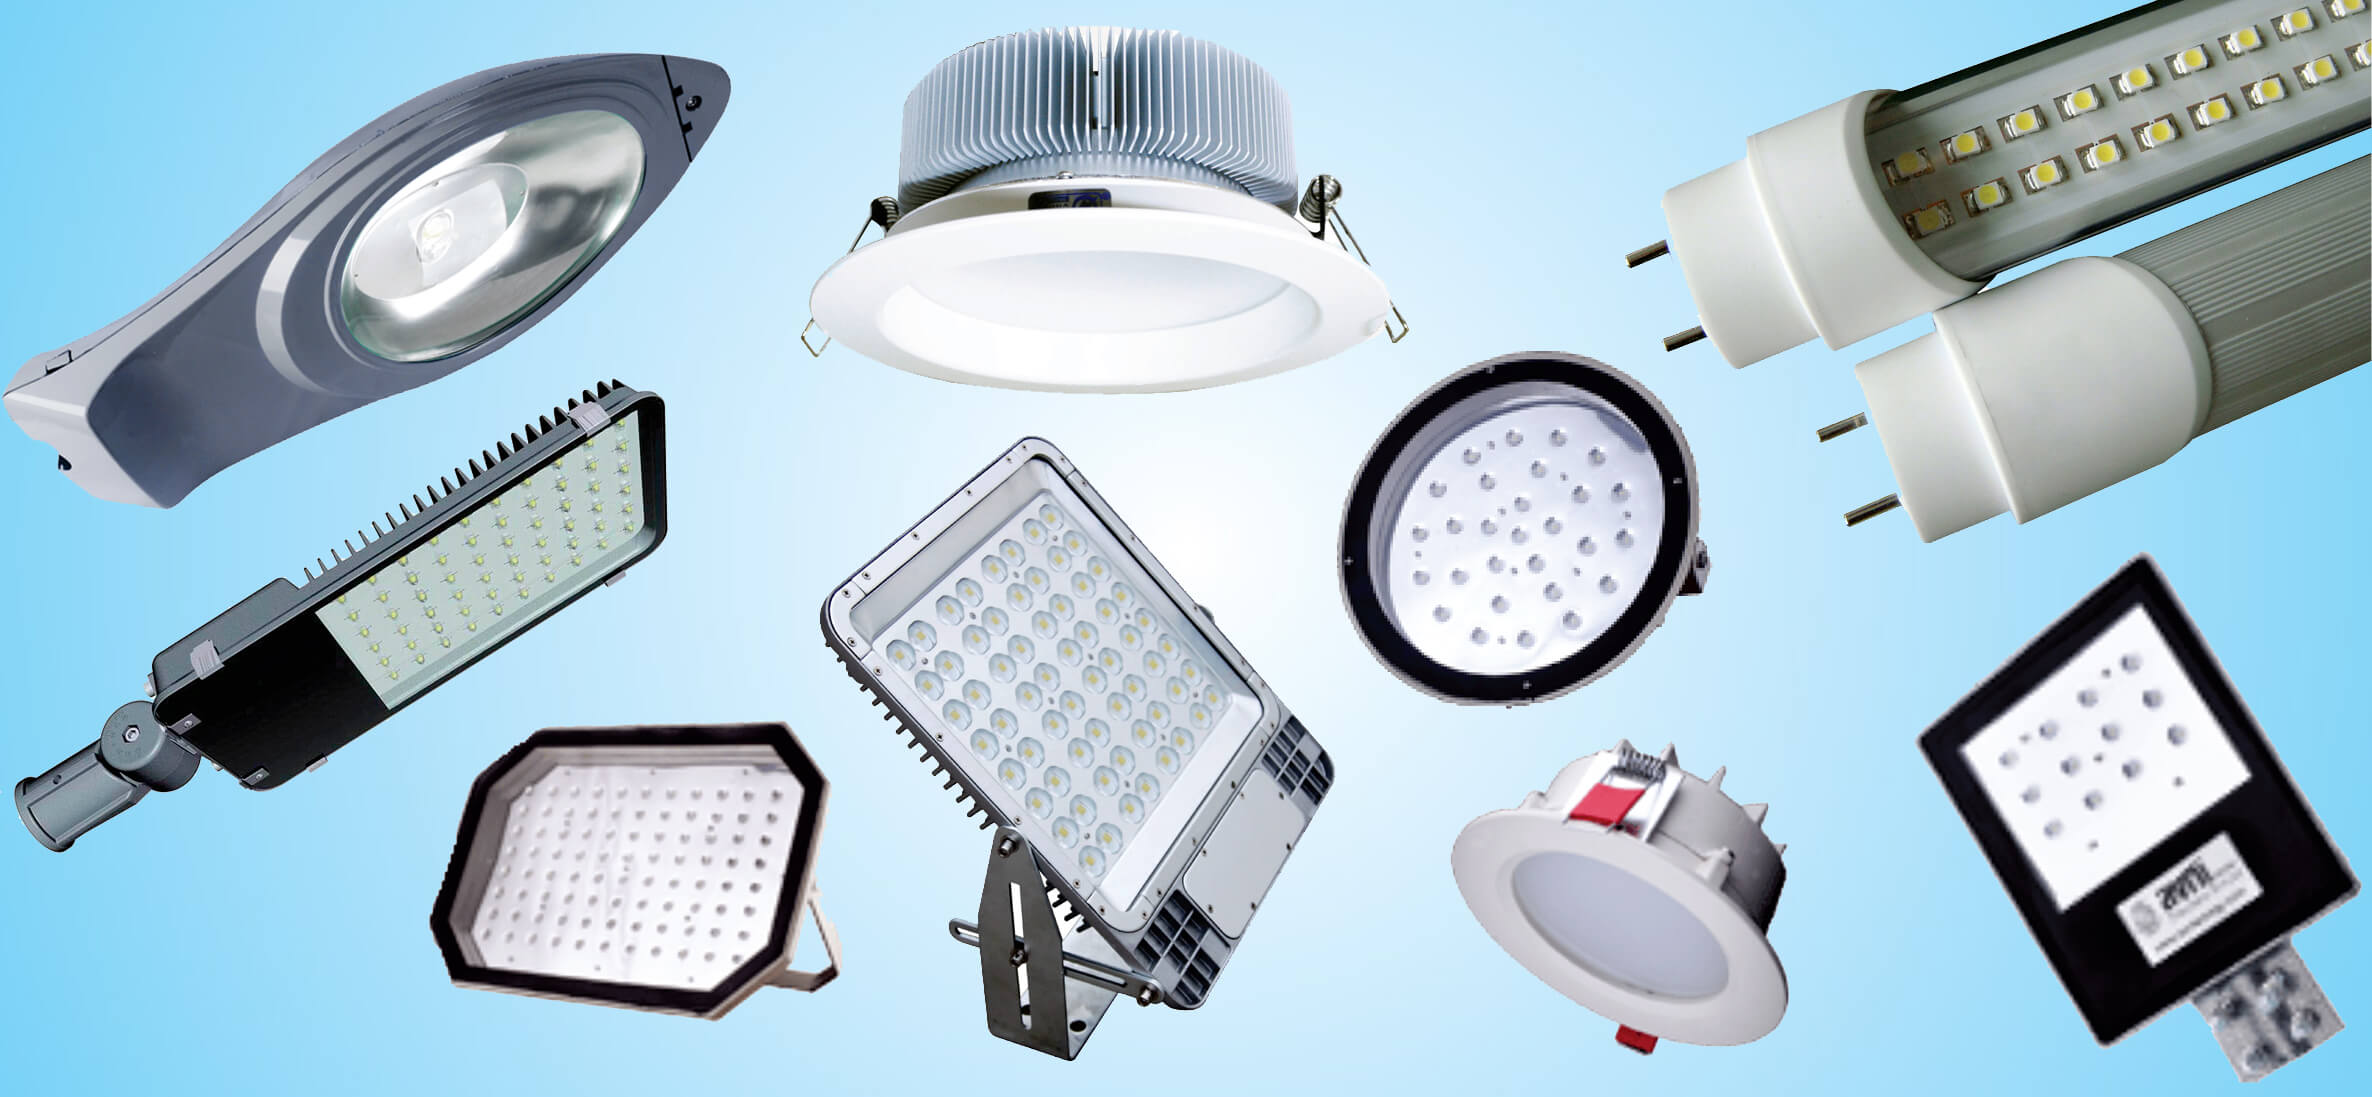 nsw led light replacement, nsw led replacement, tube light replacement Sydney, led panel lights sydney